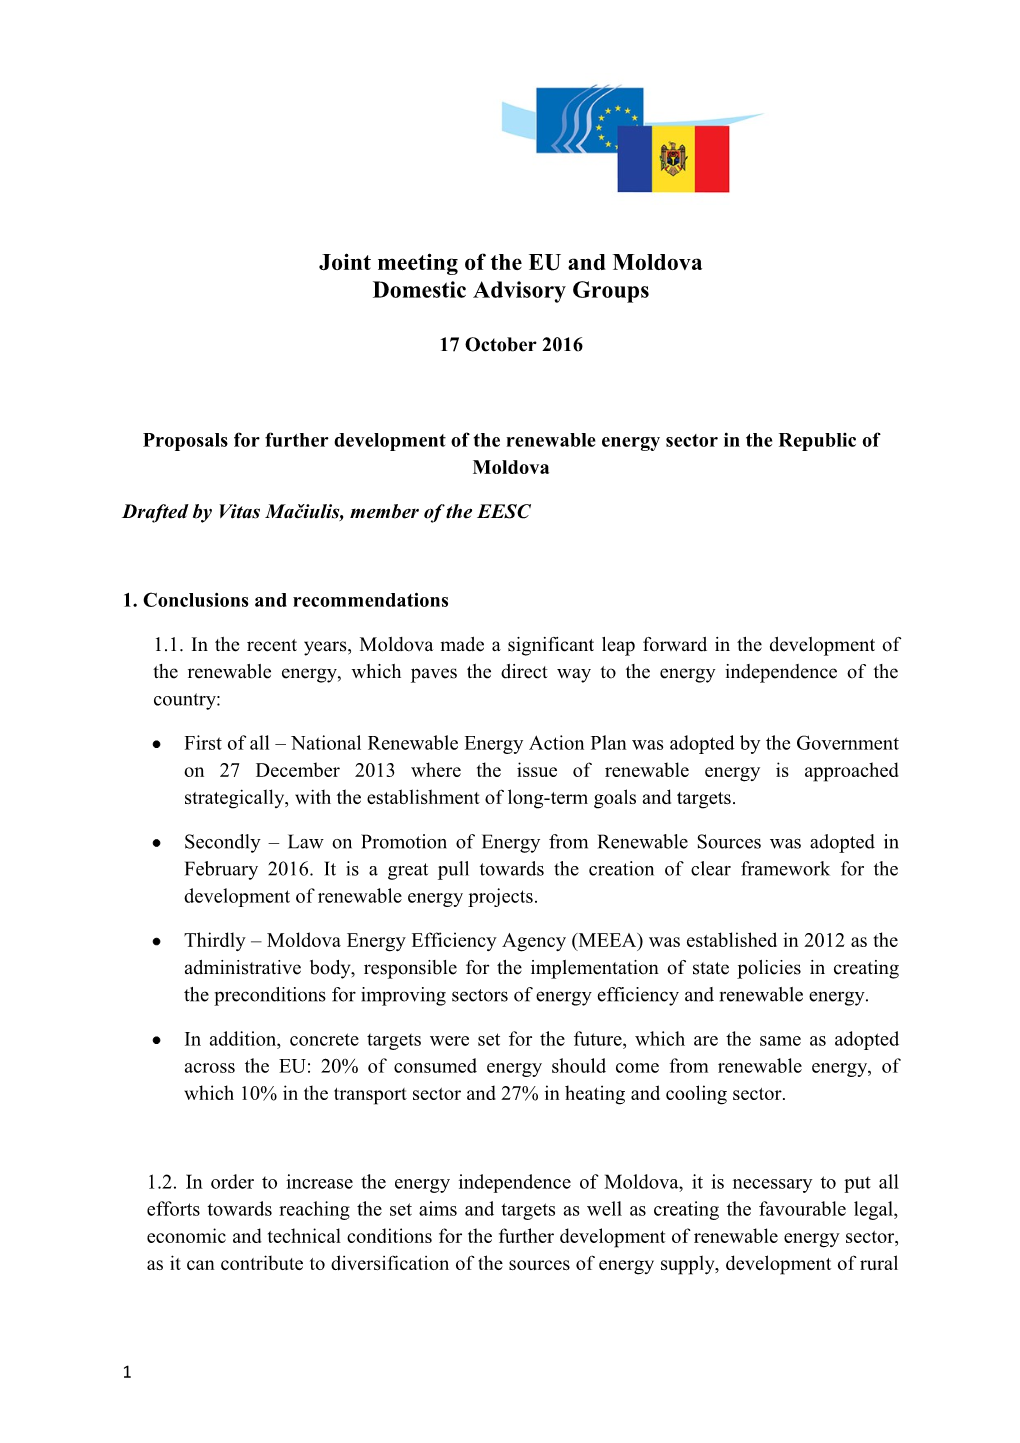 Joint Meeting of the EU and Moldova